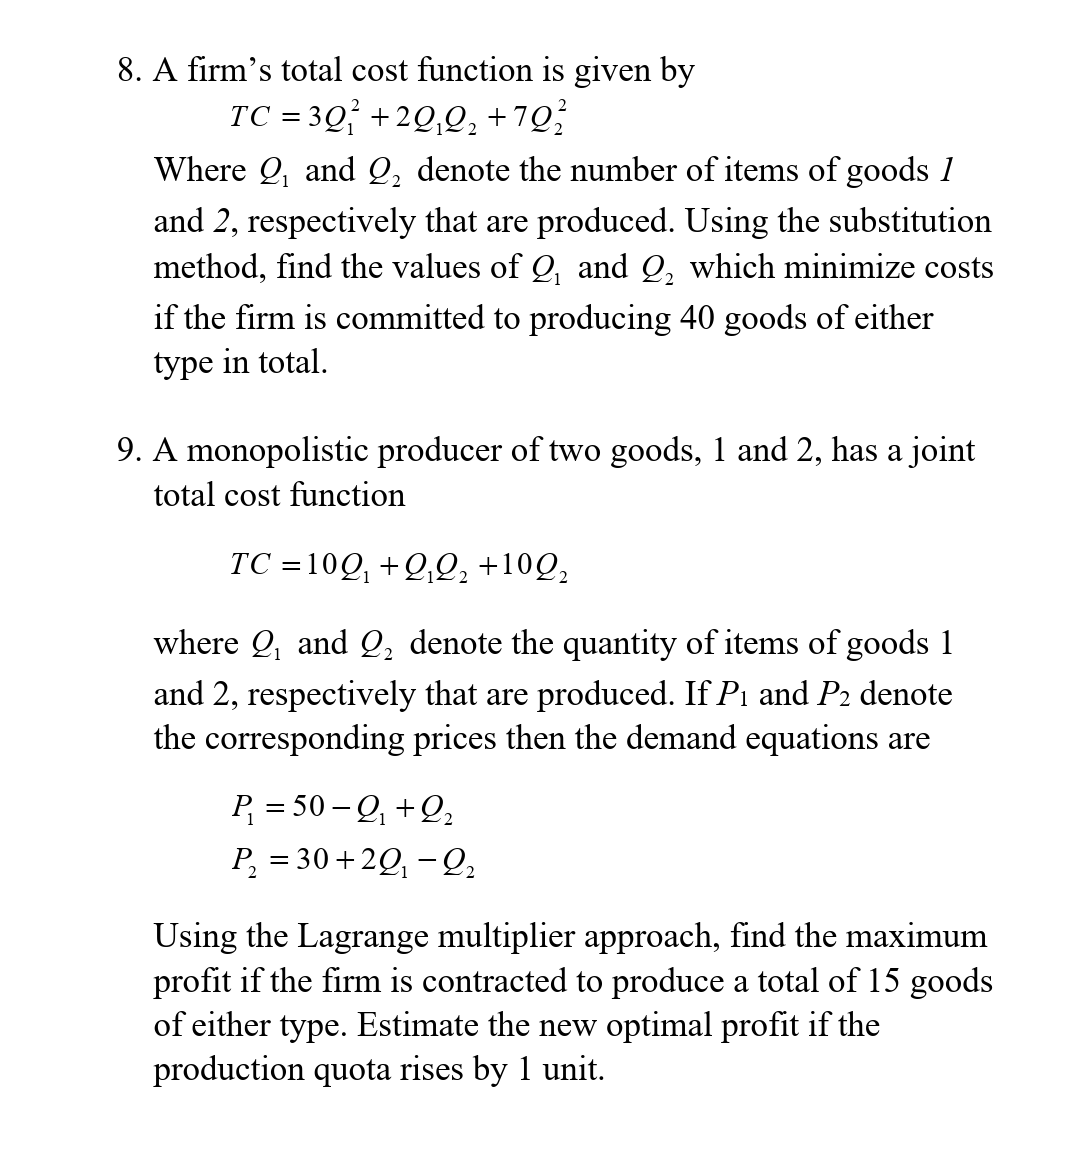 8. A firm's total cost function is given by
TC = 3Q +2Q,Q, +7Q;
Where Q, and Q, denote the number of items of goods 1
and 2, respectively that are produced. Using the substitution
method, find the values of Q, and Q, which minimize costs
if the firm is committed to producing 40 goods of either
type in total.
9. A monopolistic producer of two goods, 1 and 2, has a joint
total cost function
TC =10Q, +Q,Q, +10Q,
where Q, and Q, denote the quantity of items of goods 1
and 2, respectively that are produced. If Pi and P2 denote
the corresponding prices then the demand equations are
P, = 50 – Q, +Q,
P, = 30+2Q, - Q,
Using the Lagrange multiplier approach, find the maximum
profit if the firm is contracted to produce a total of 15 goods
of either type. Estimate the new optimal profit if the
production quota rises by 1 unit.
